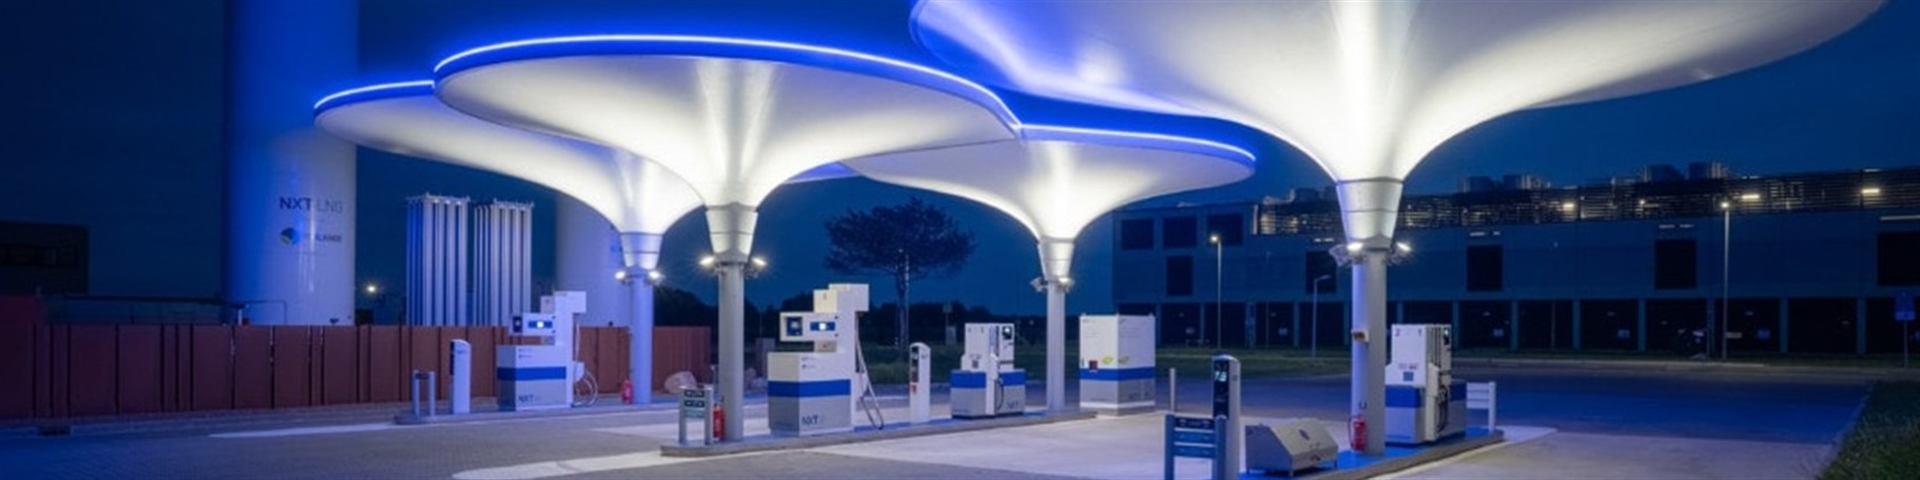 Hydrogen fuelling station of the future